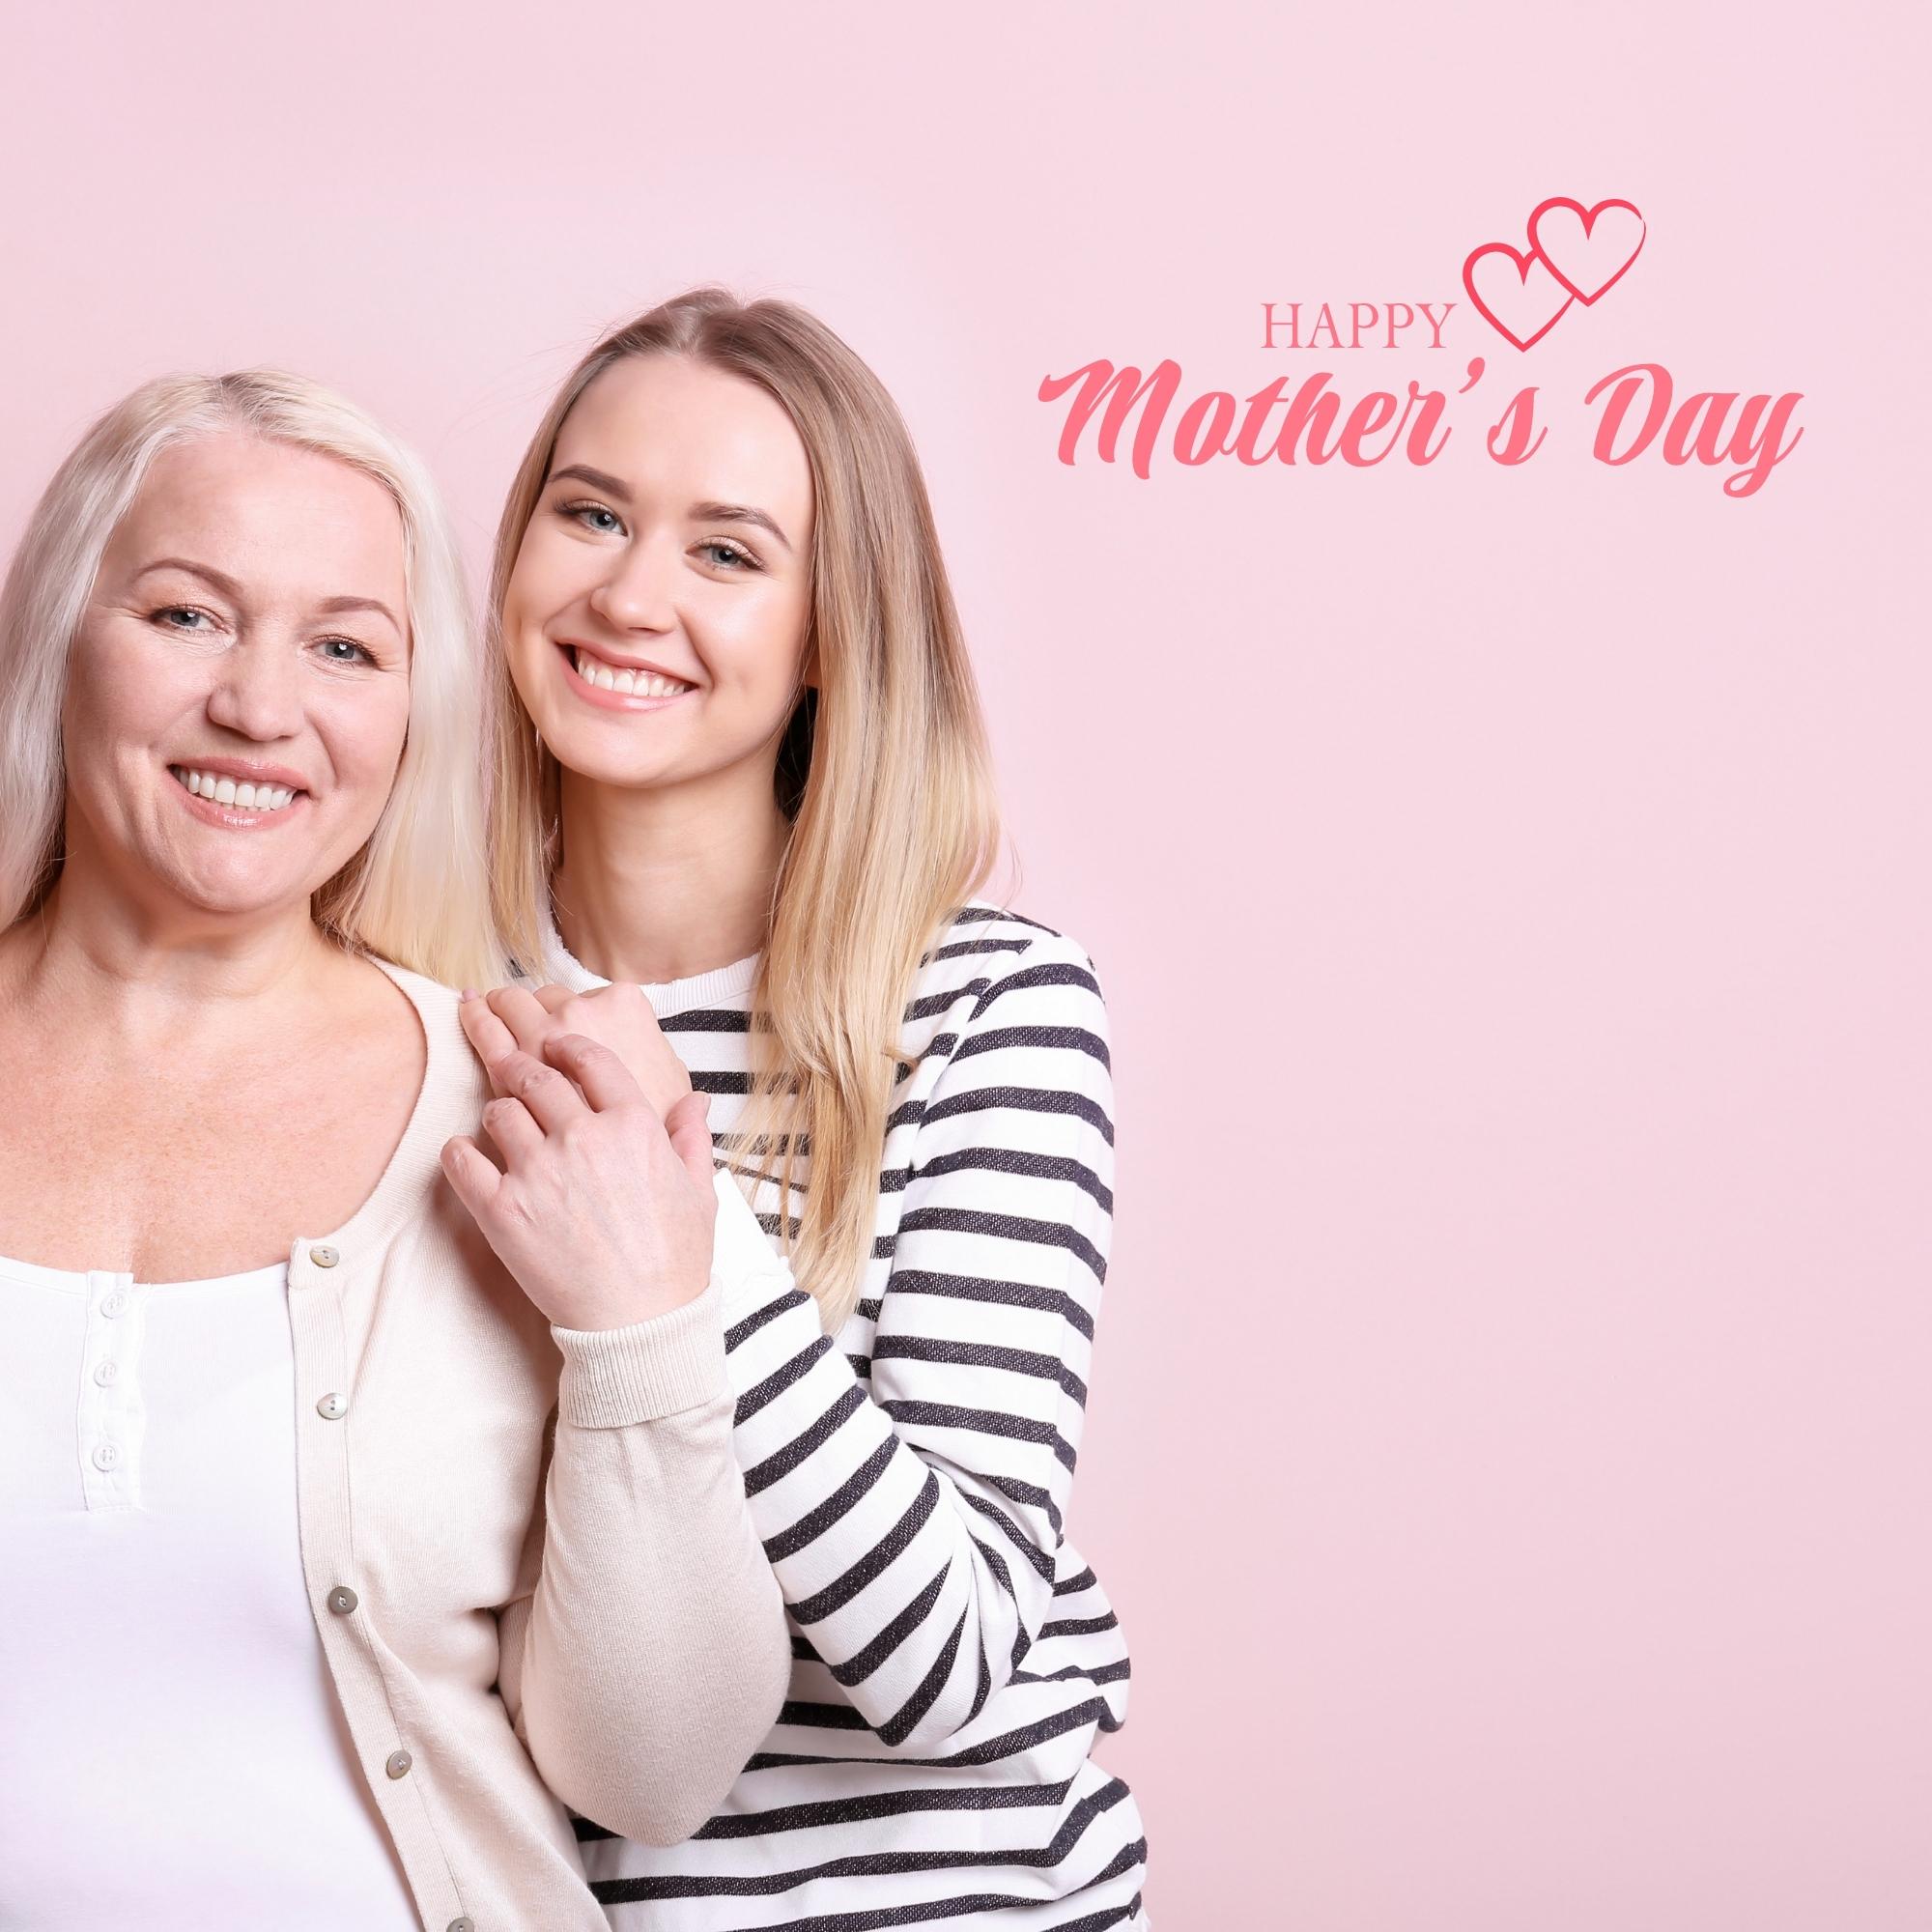 Happy Mothers Day Images | 1045 | Free Download [8k,4k,Hd]